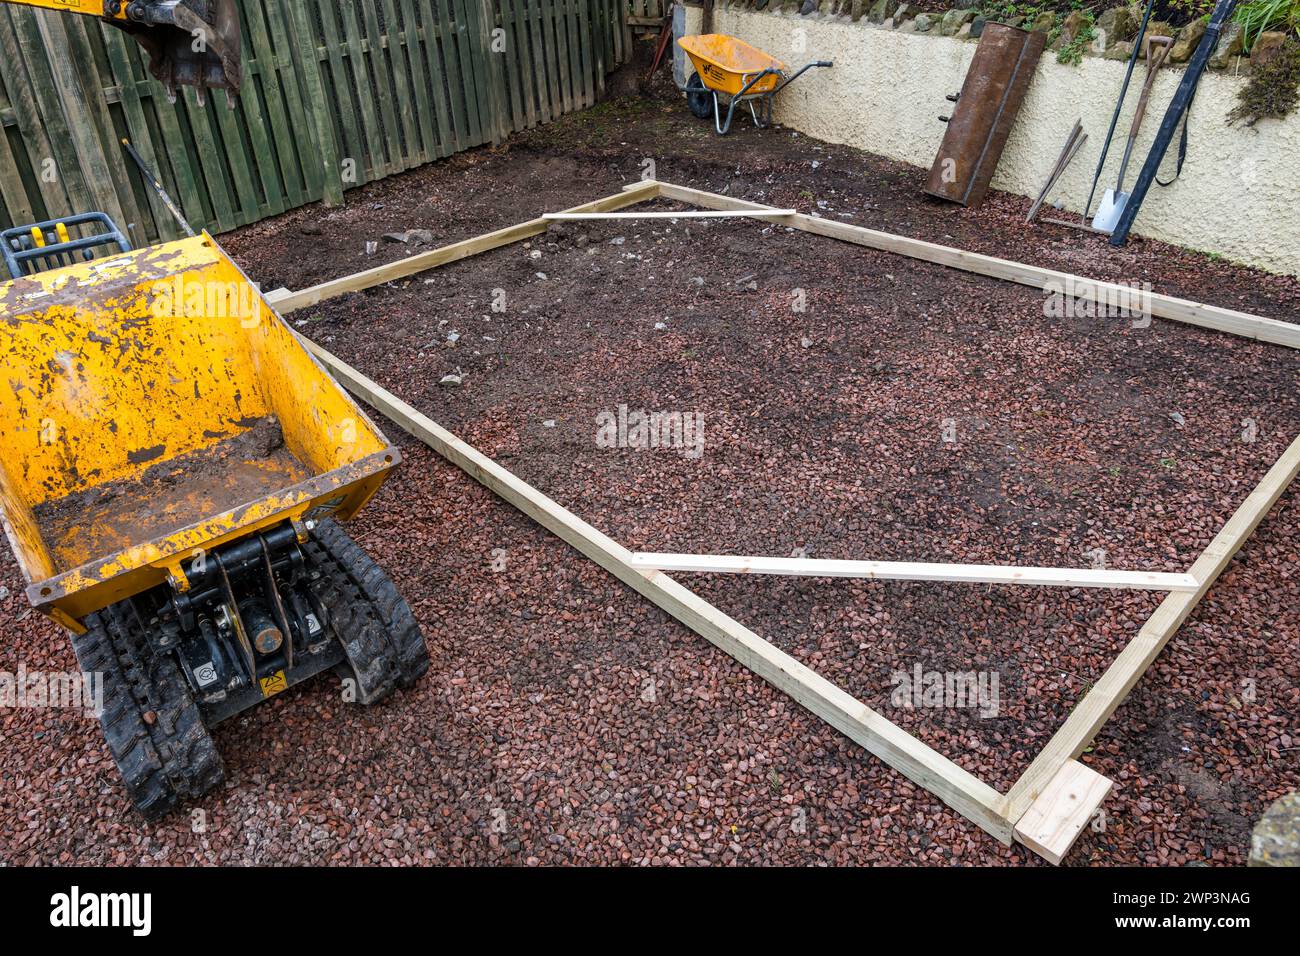 Frame ofr construction work in a driveway to build a garden room, Scotland, UK Stock Photo